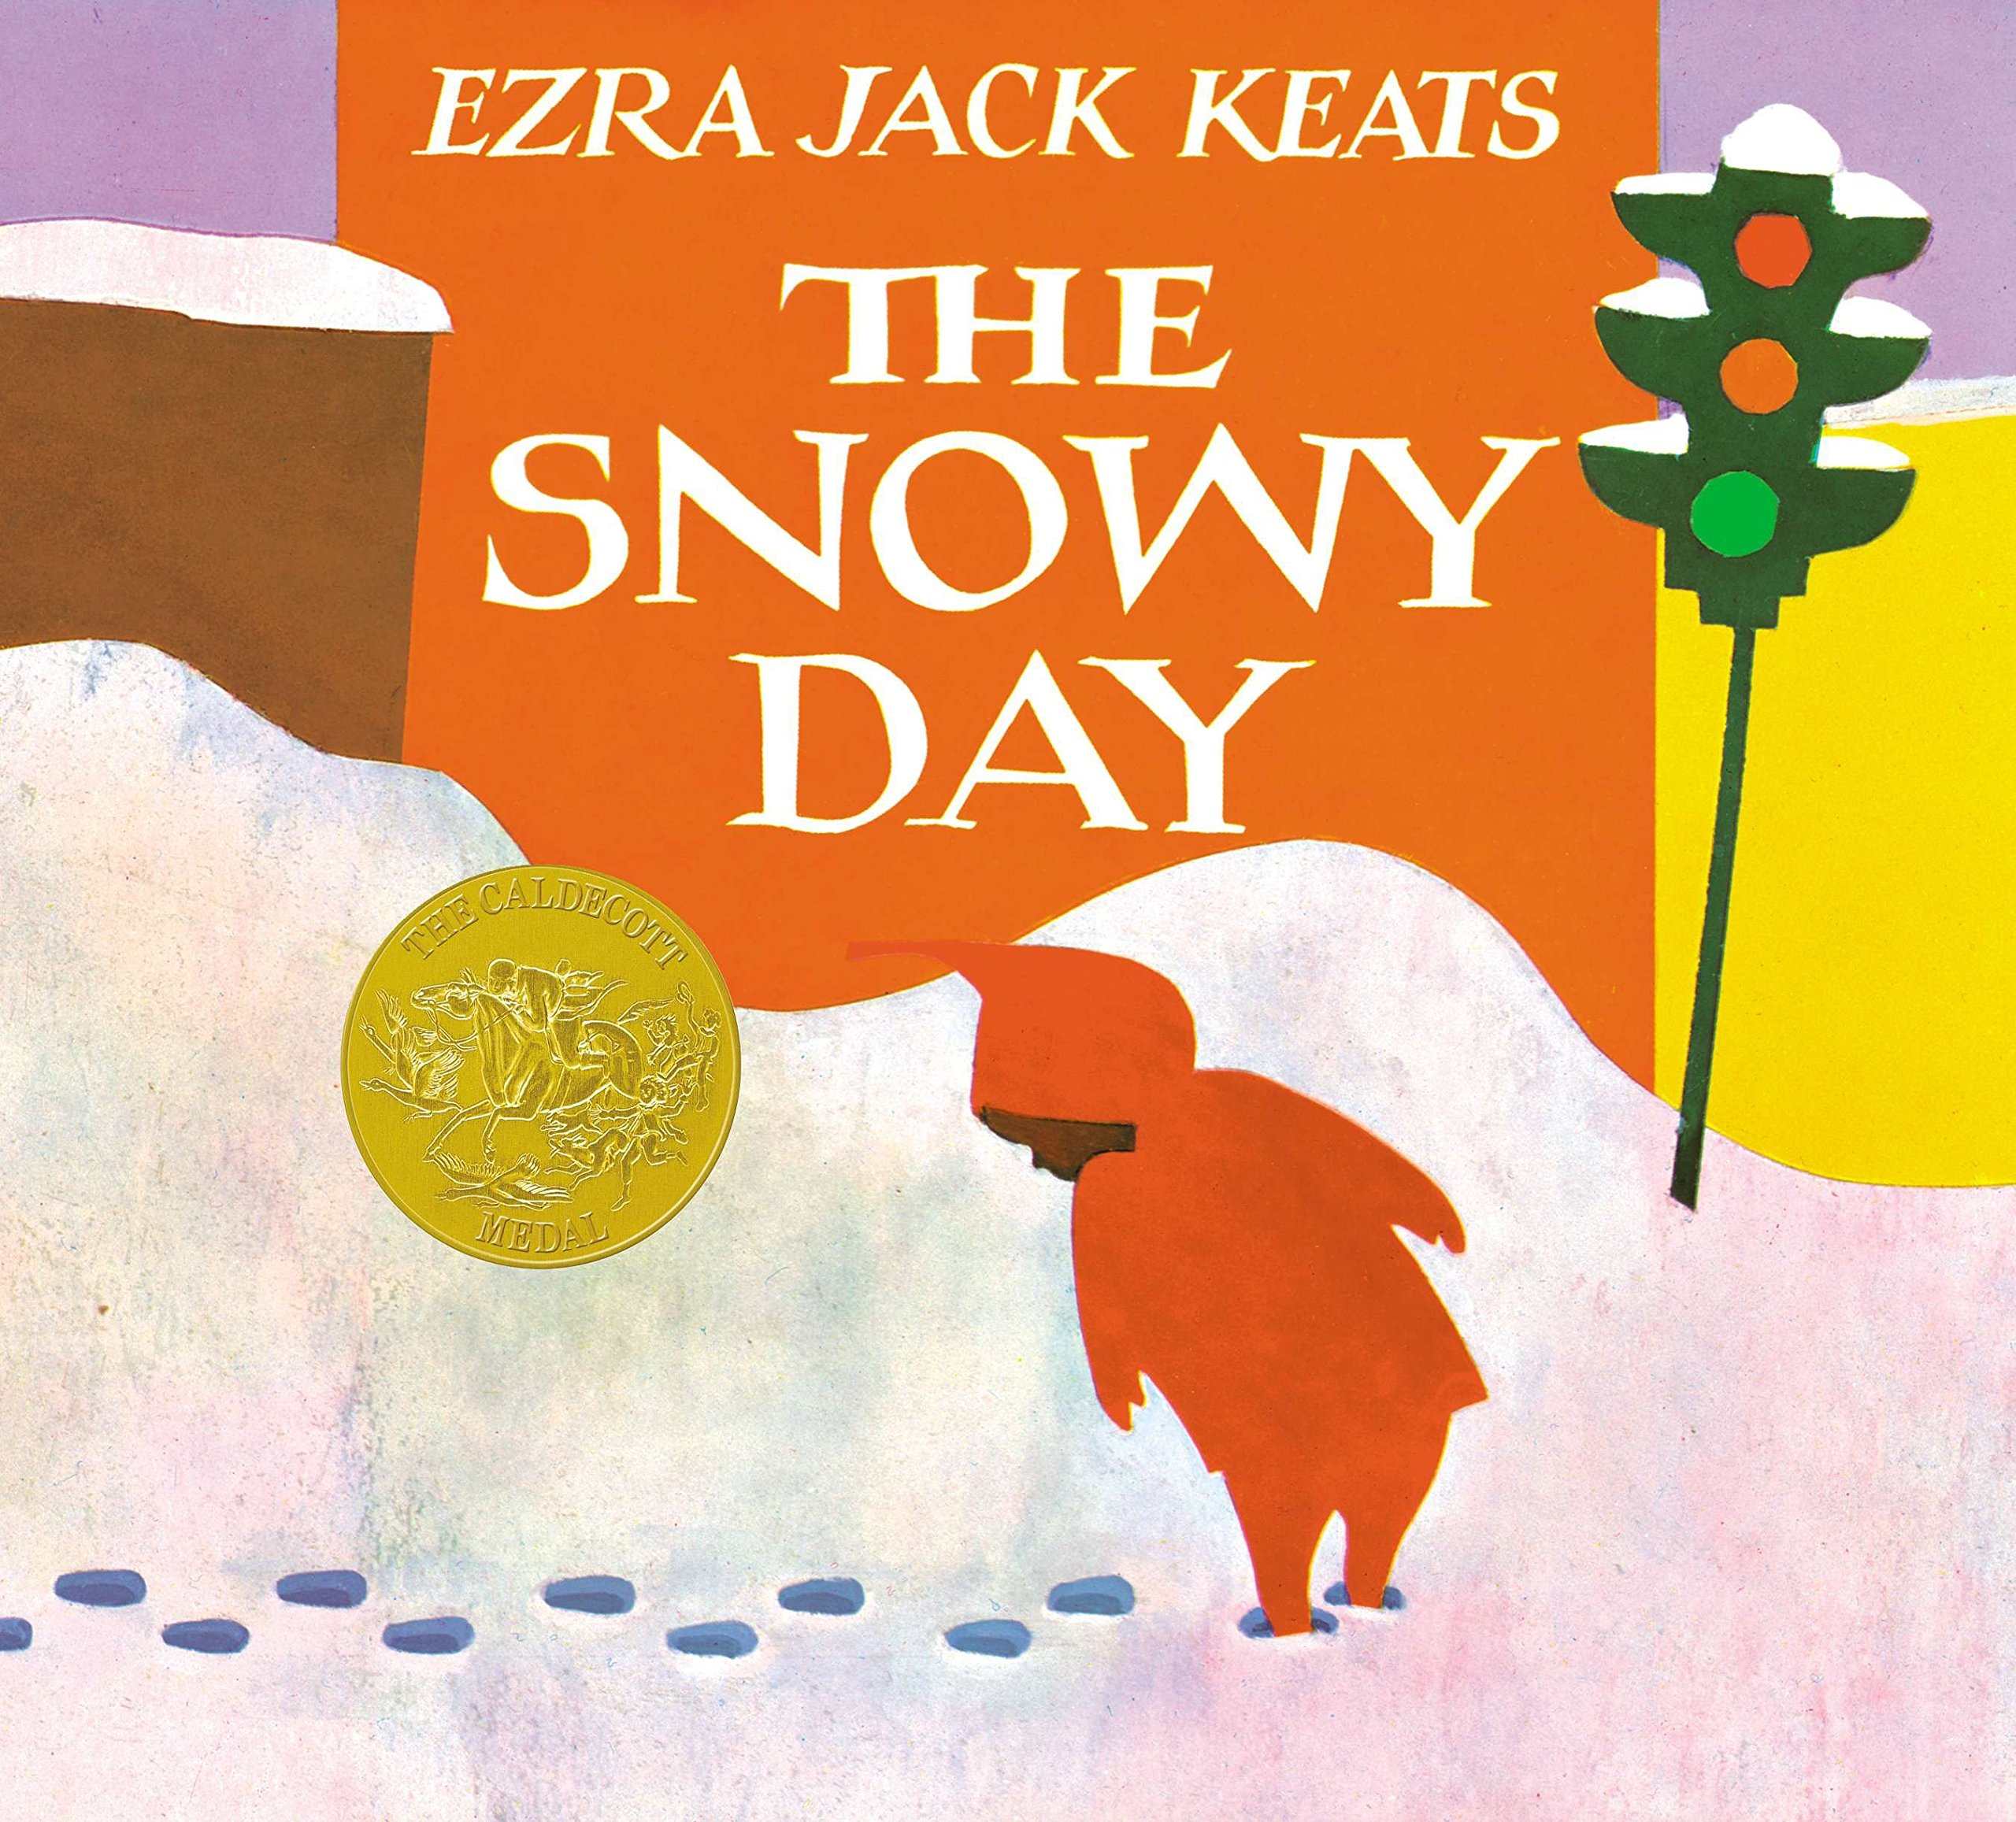 The snowy day ezra jack keats book cover childrens black history month